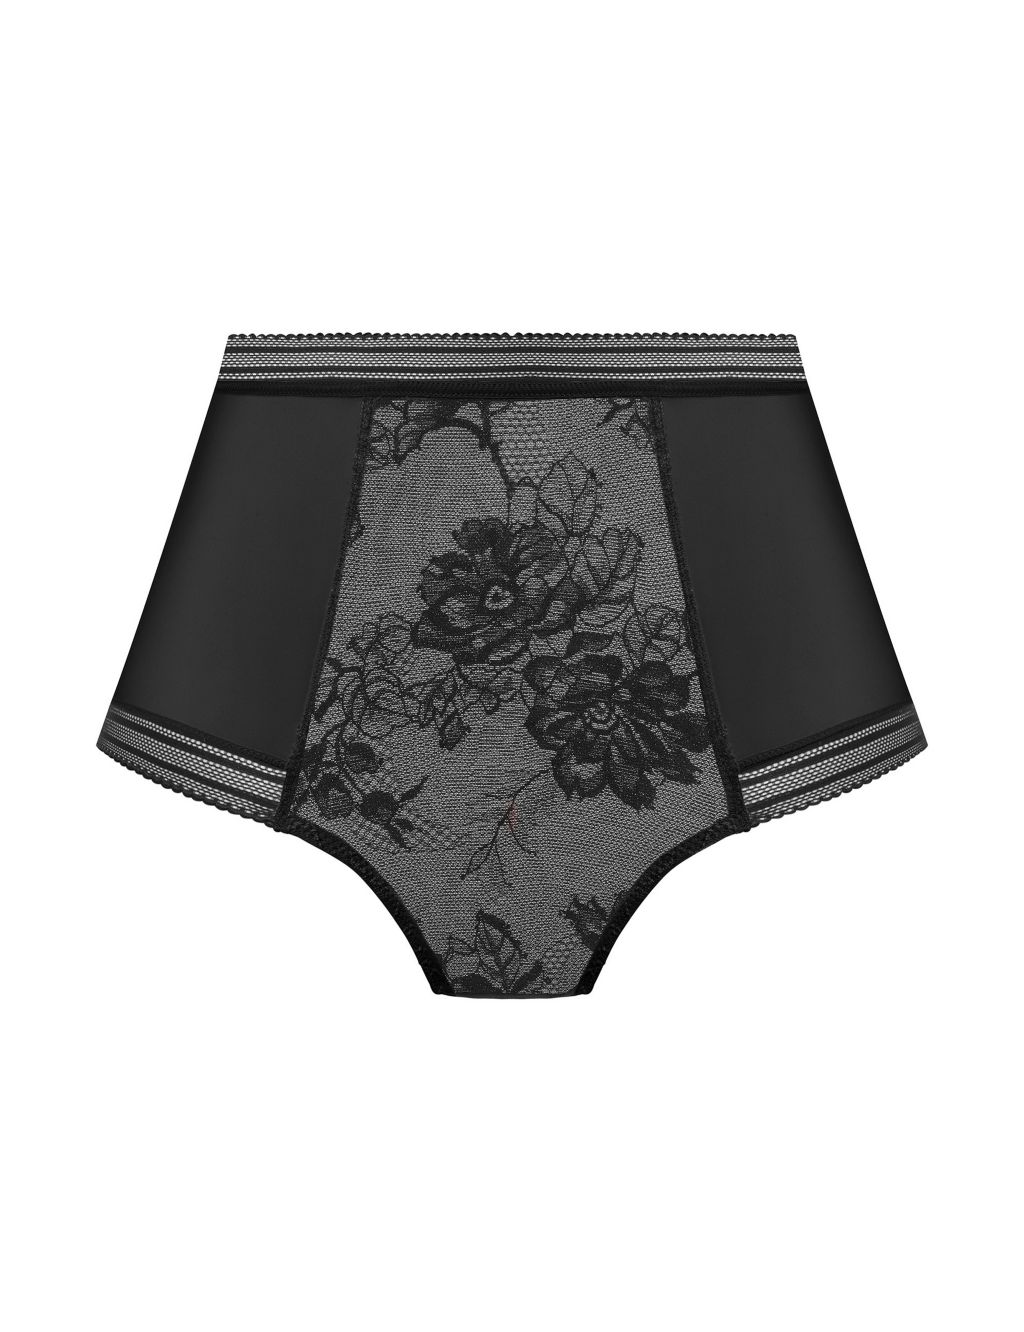 Fusion Lace Full Briefs image 2